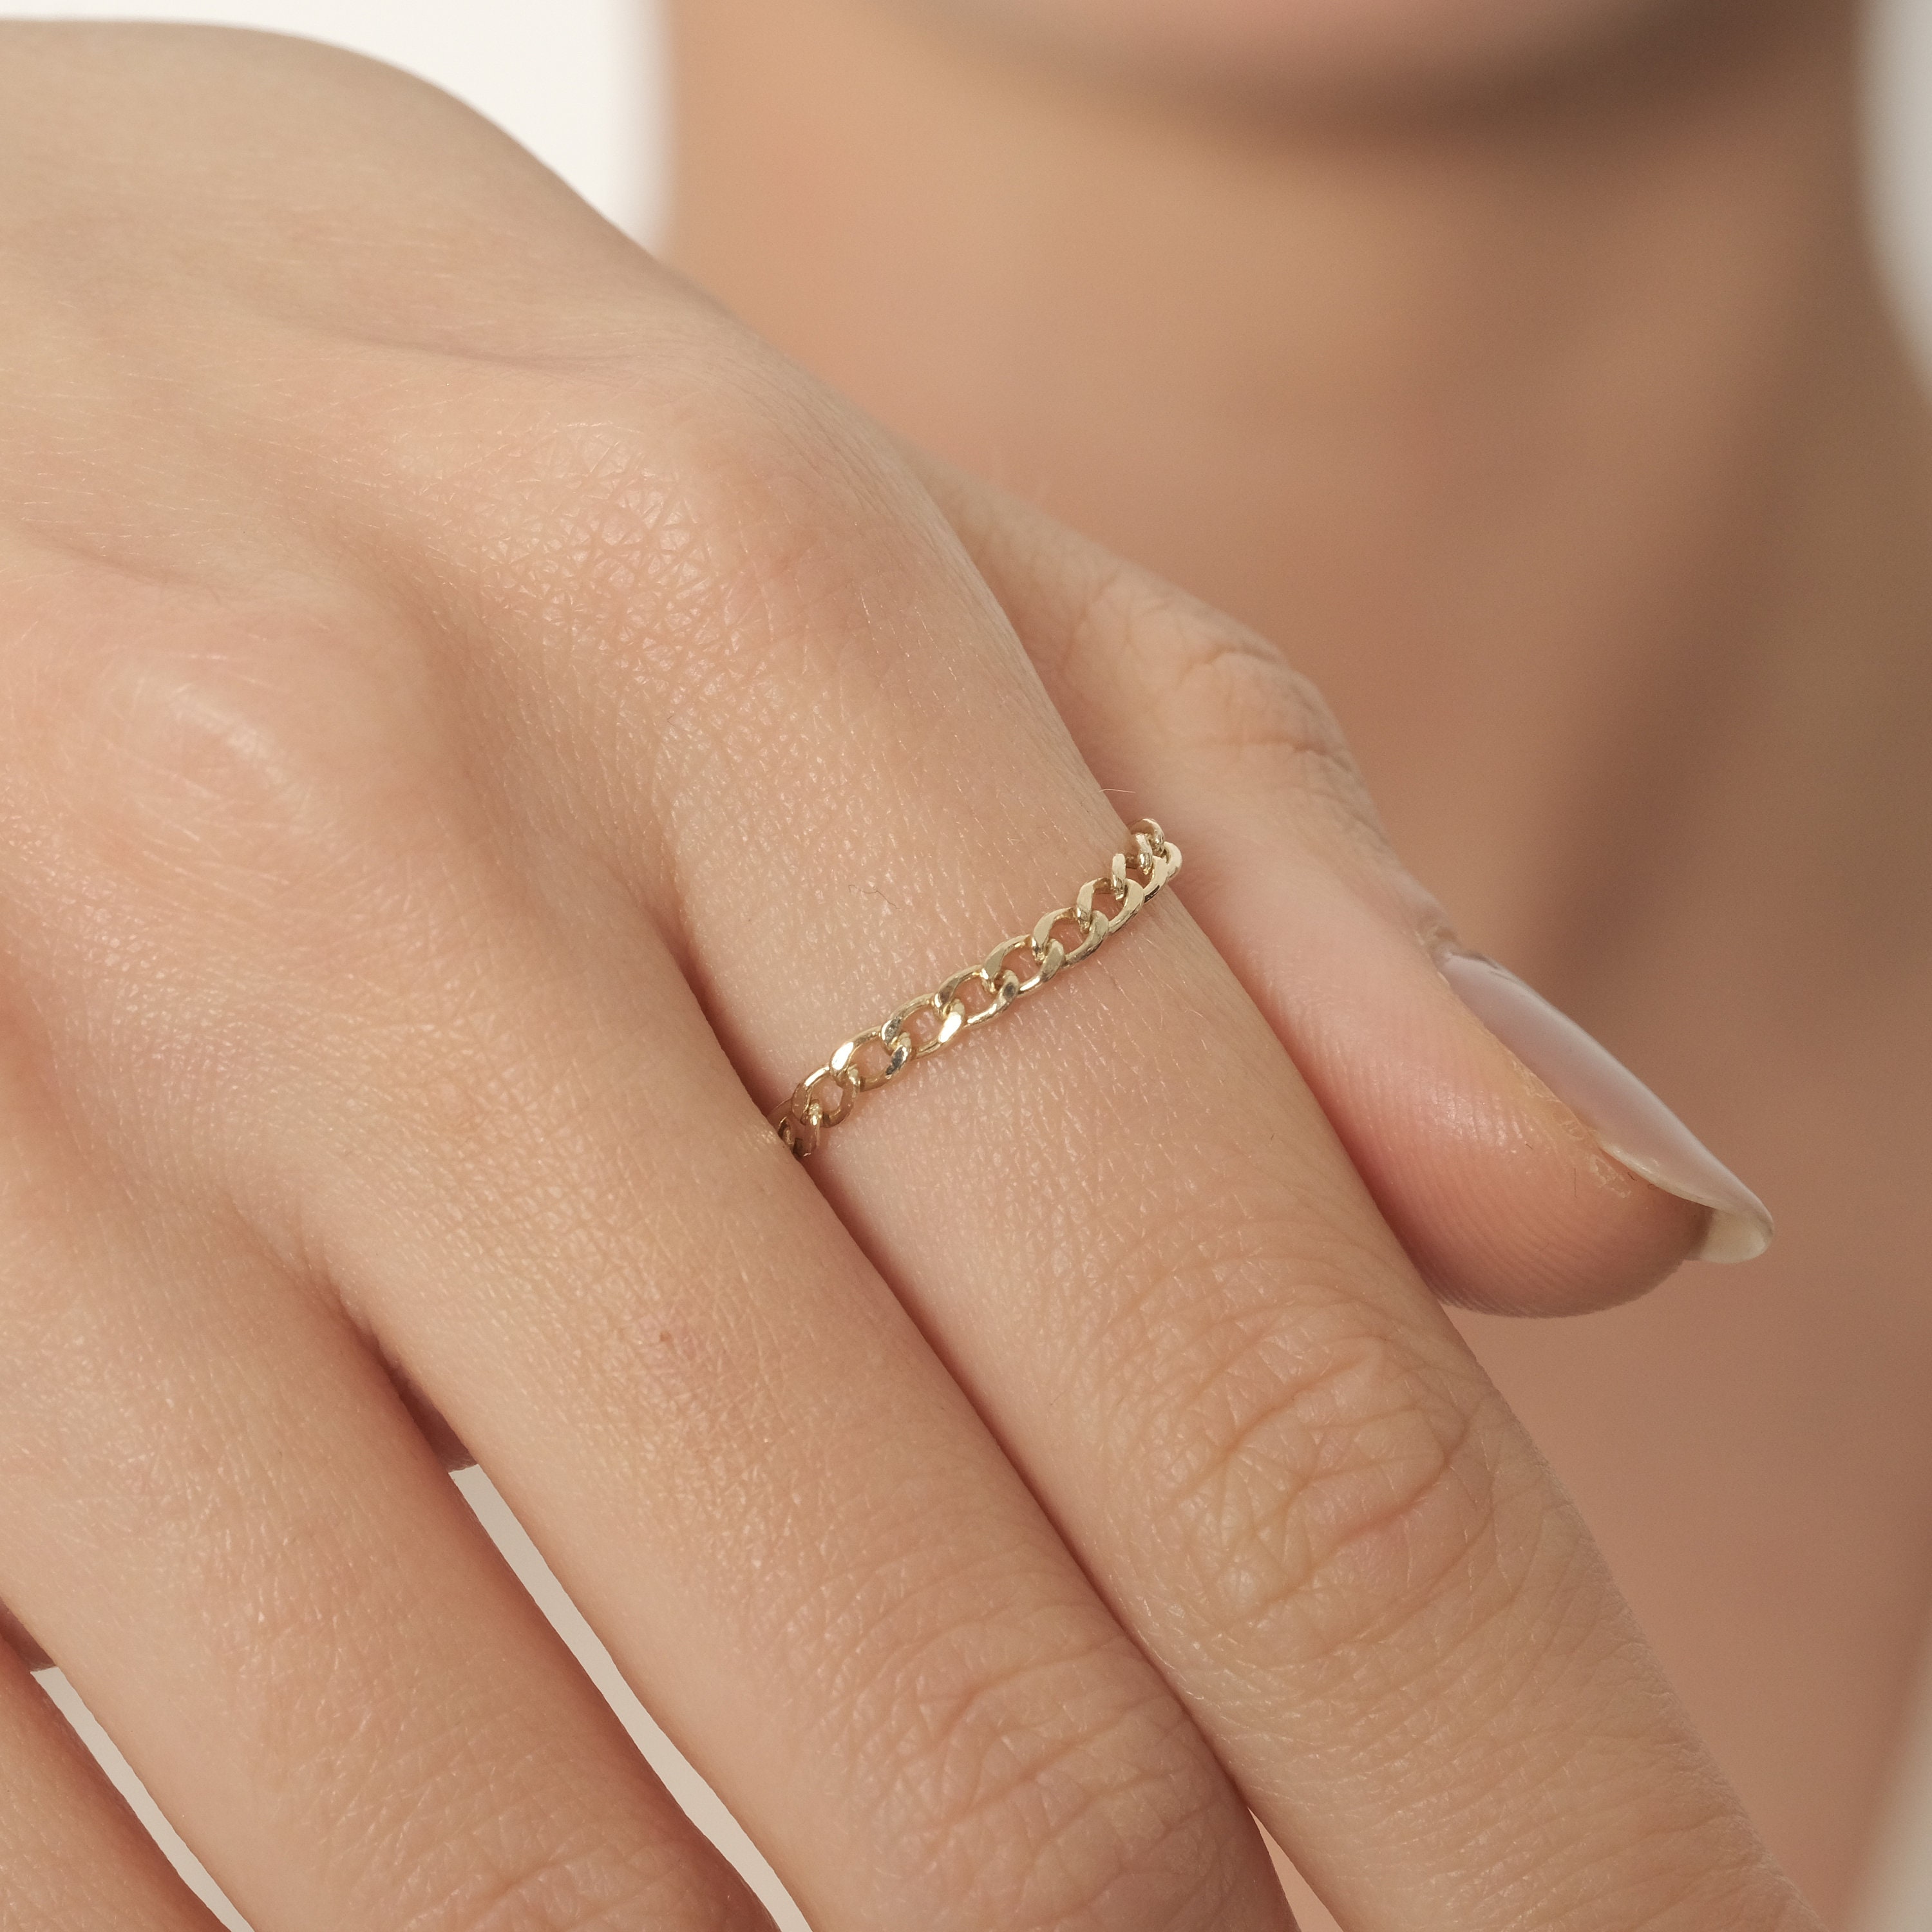 FRENELLE Jewellery | Gold Ring with Chain Design | Buy Gifts Online NZ